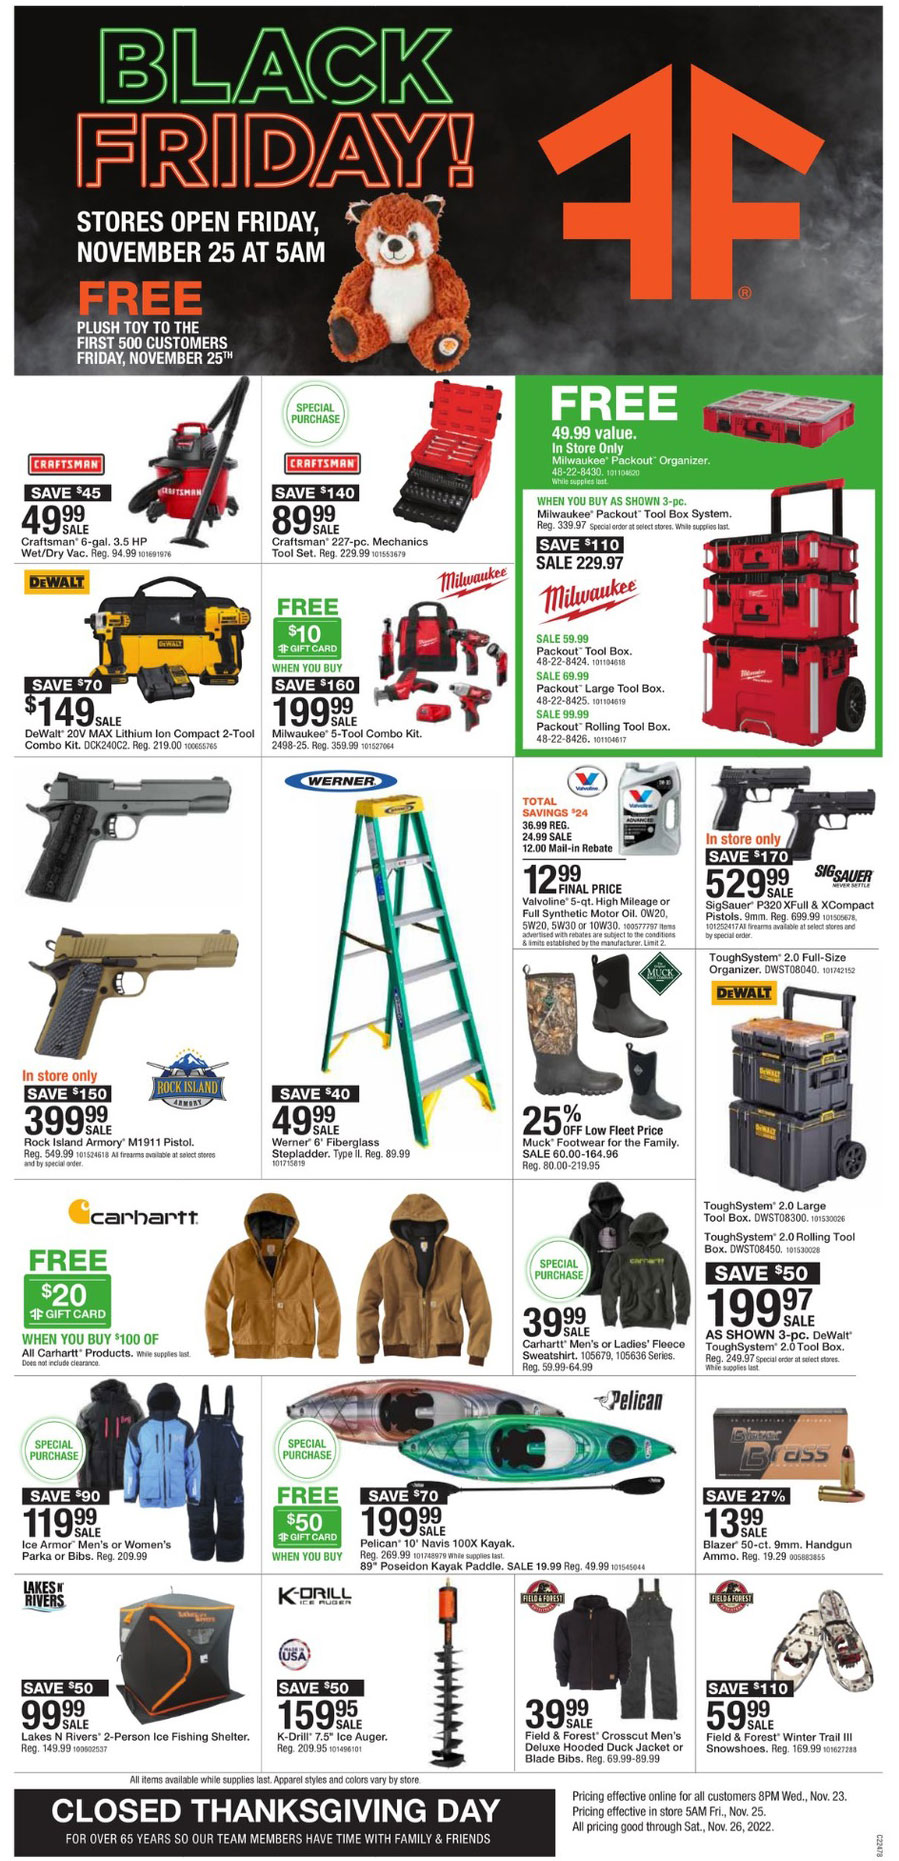 Mills Fleet Farm Black Friday 2022 Ad, Deals, and Sale Info - Does Stockx Have Deals During Black Friday